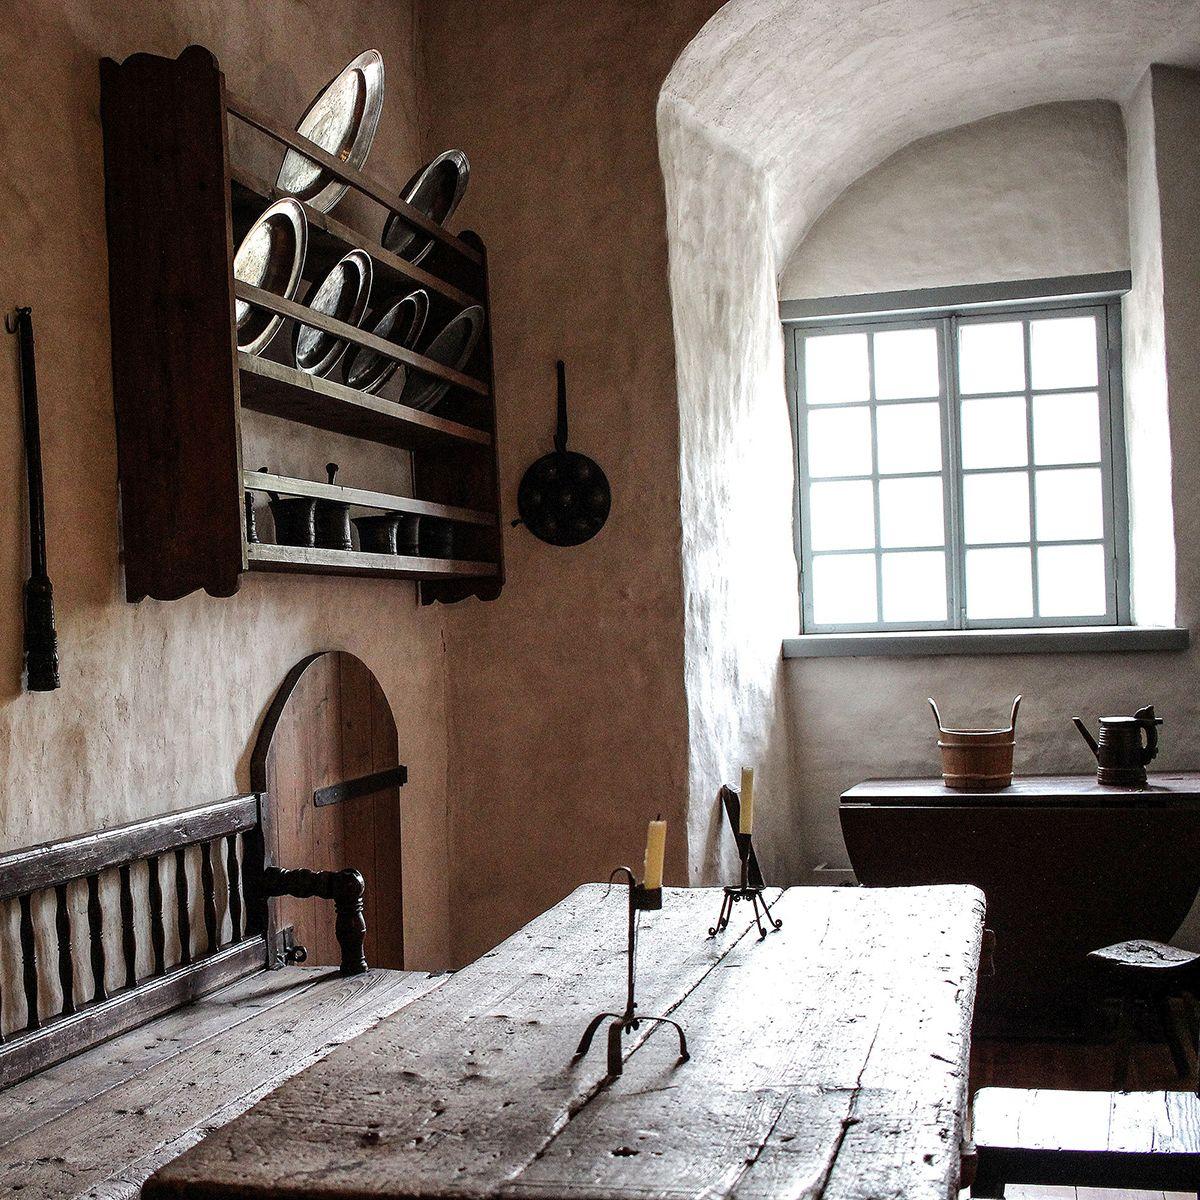 The interior of the kitchen at Turku Castle, featuring a long wooden table and pots and pans hanging on the wall.